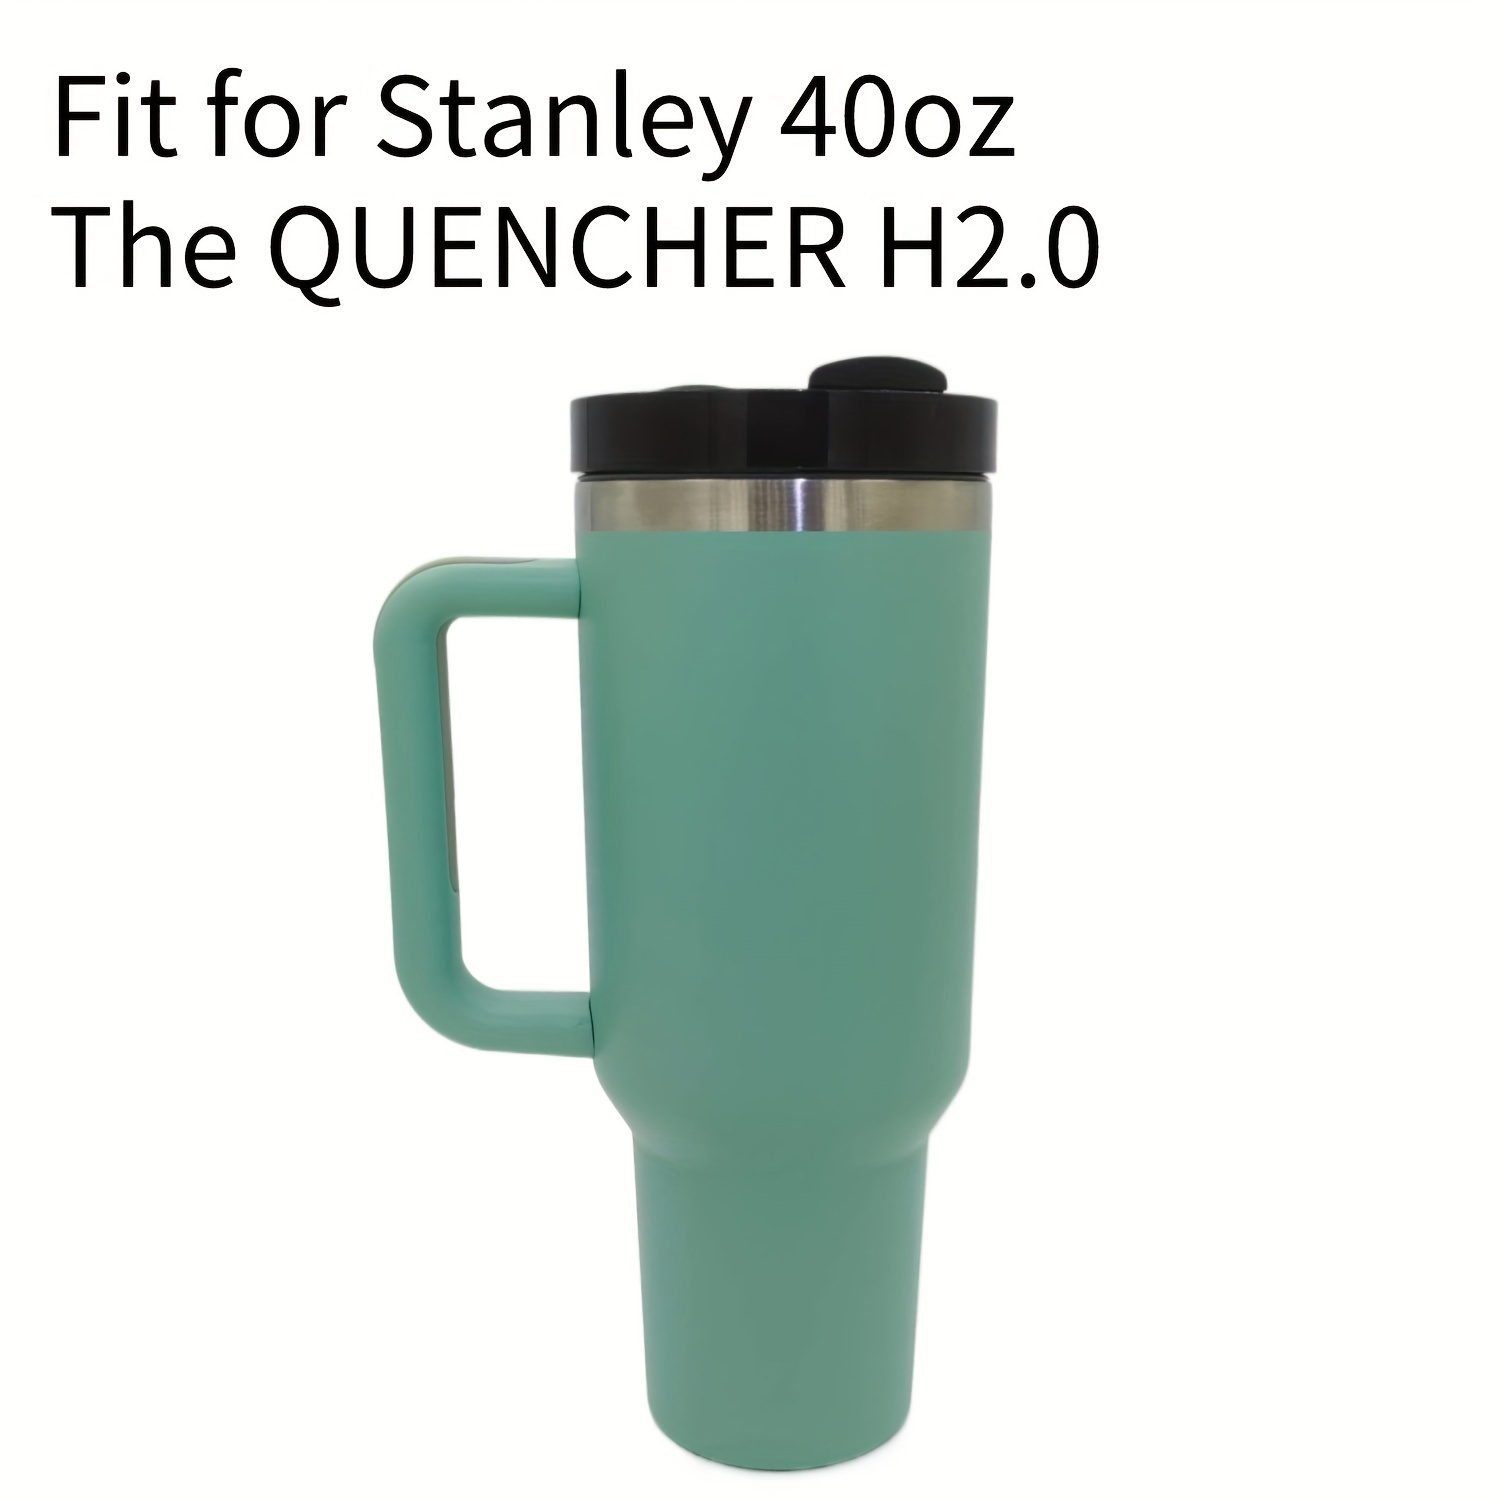 Stanley 40oz Replacement Lid Dupe 